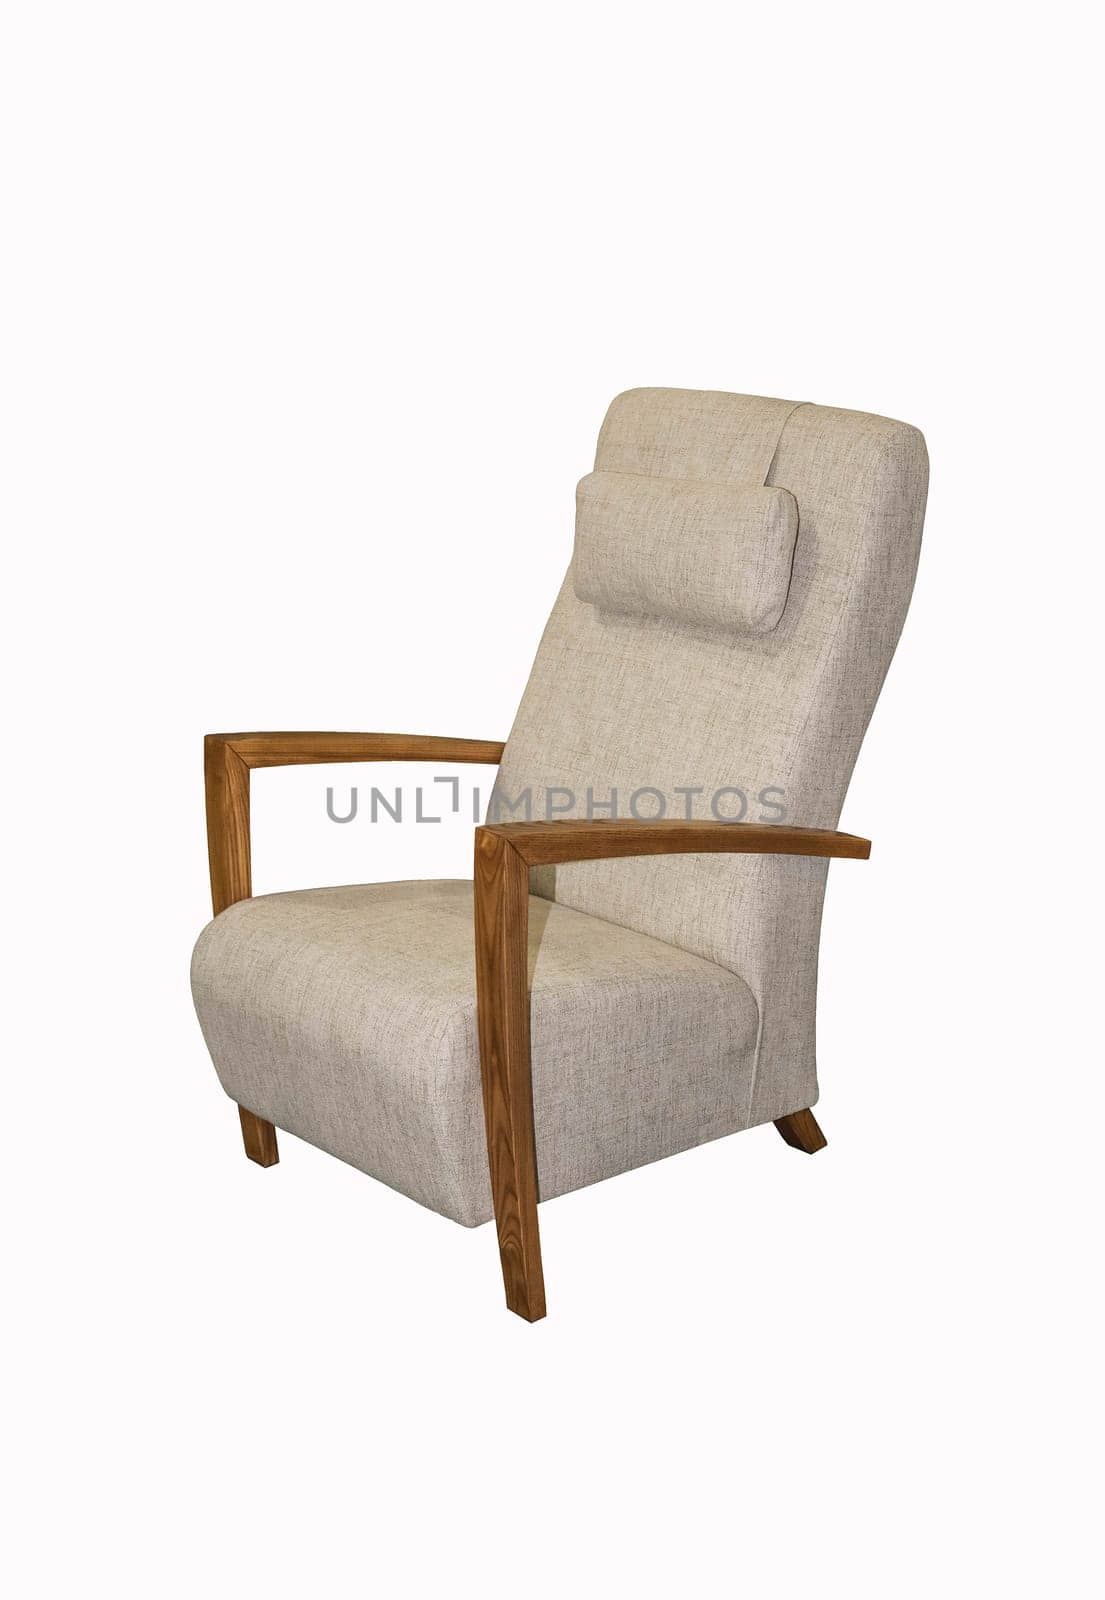 Comfortable gray armchair with wooden armrests on white background. Interior element